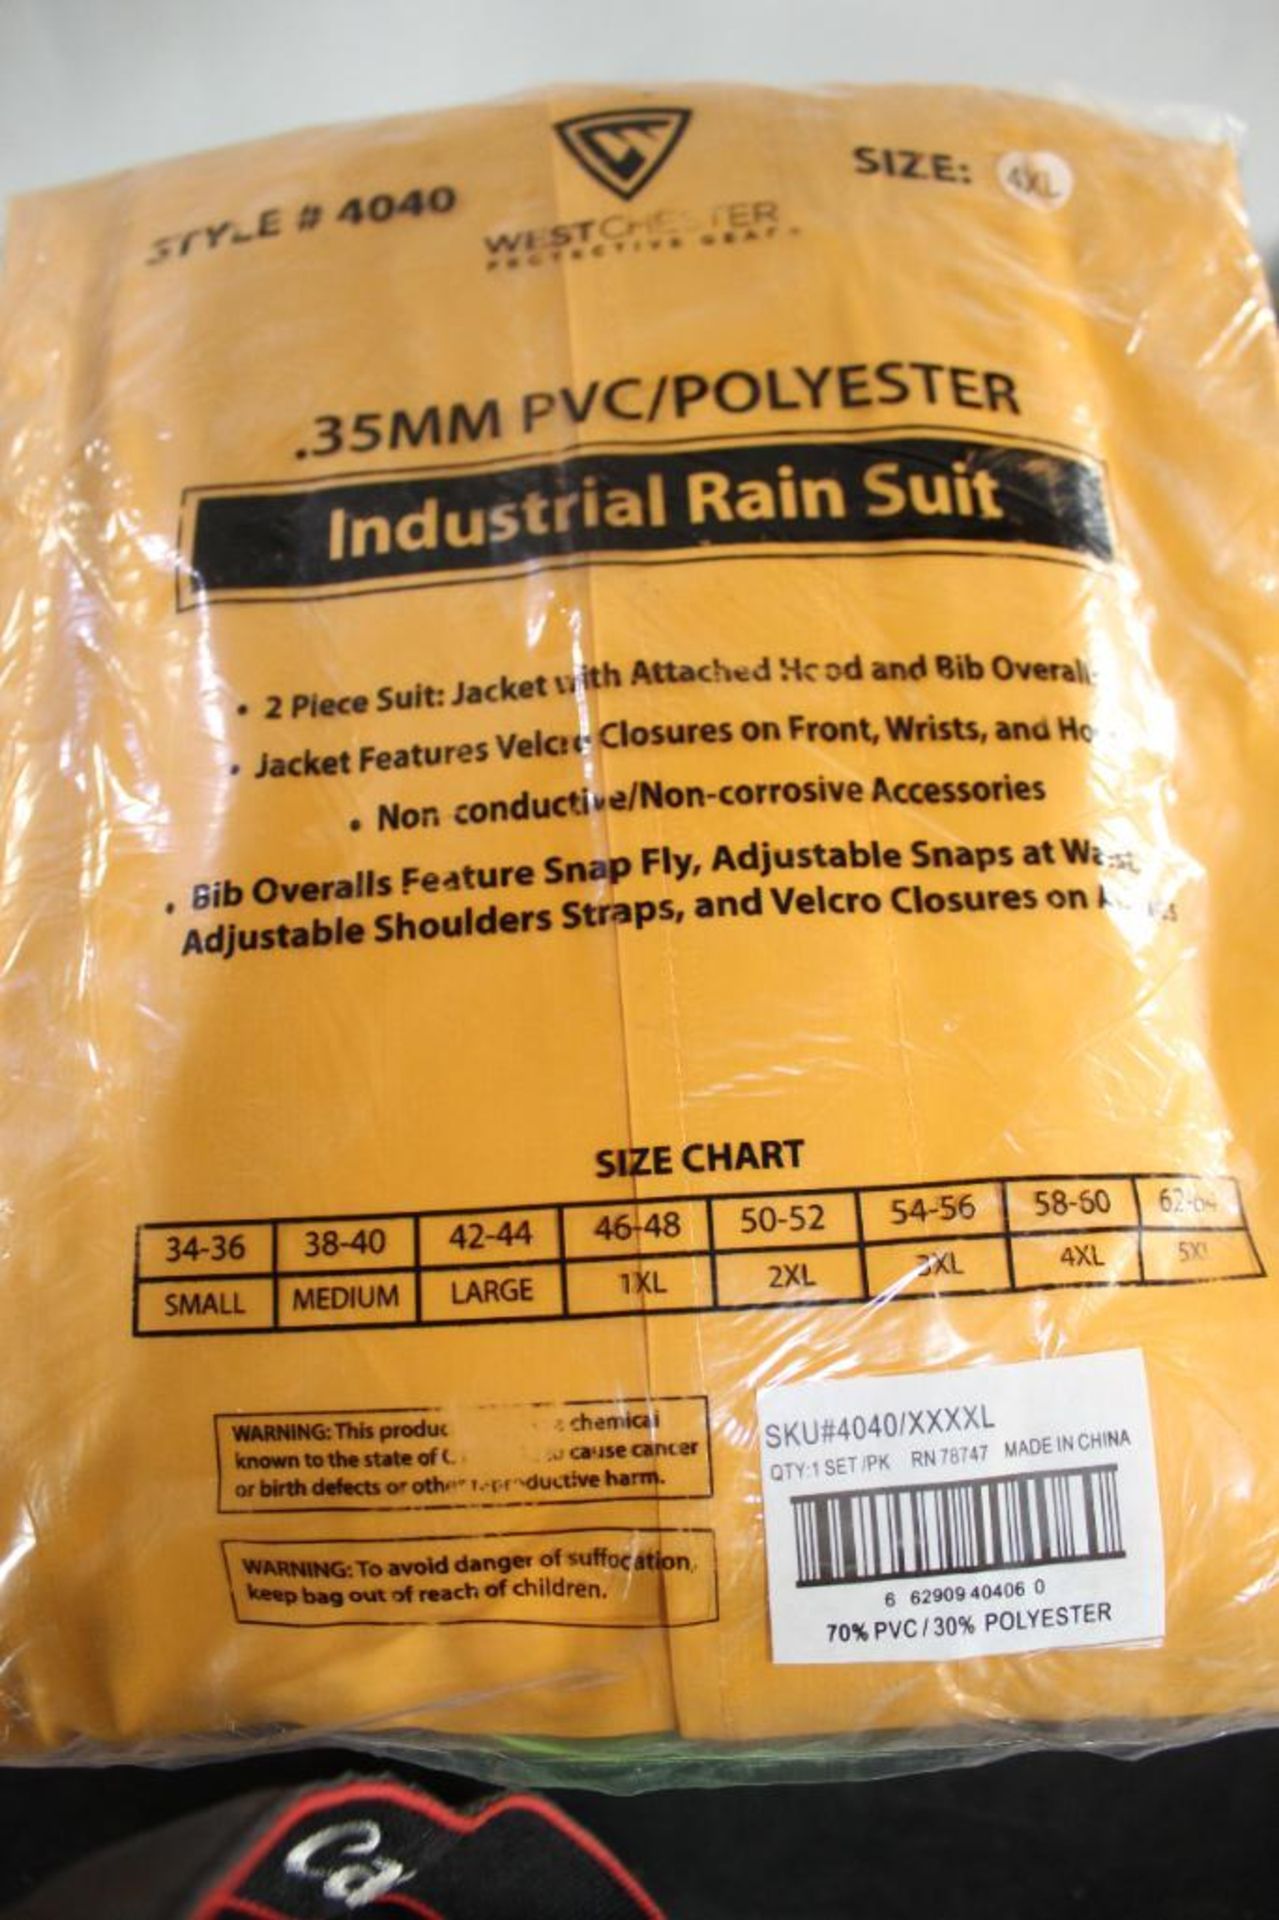 Lot of (4) Westchester .35mm PVC/Polyester Industrial 2pc. Rain Suit - Image 3 of 4